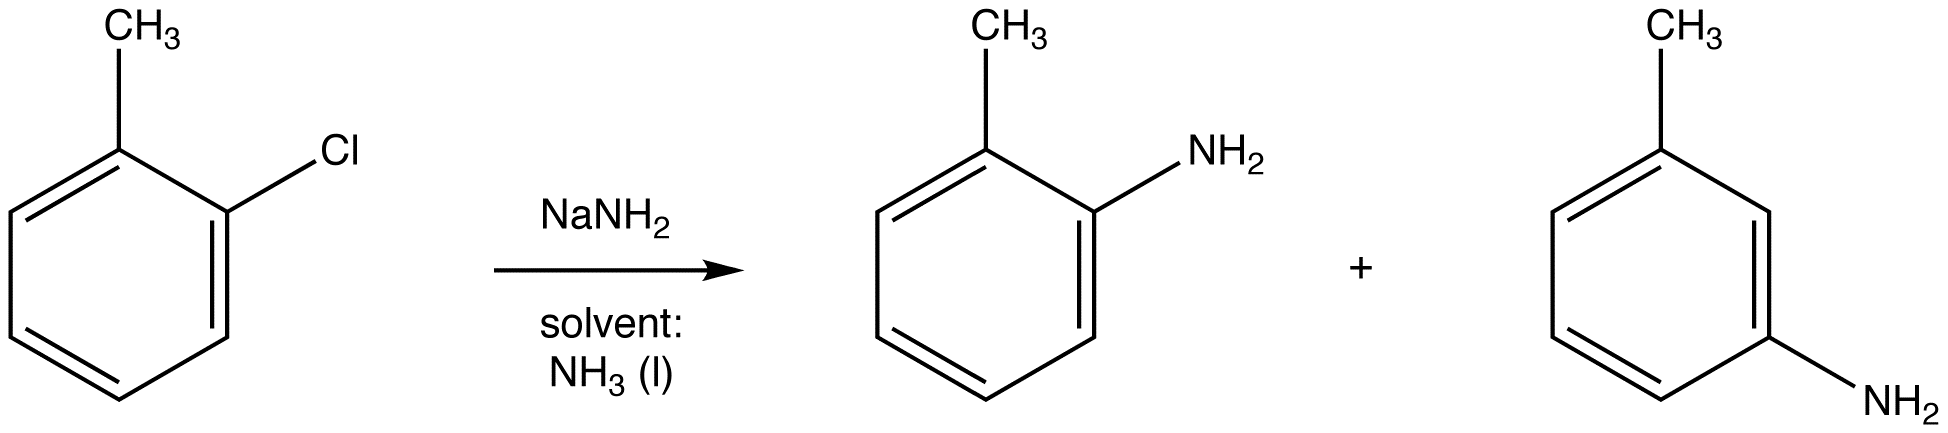 benzynemechanism1.png